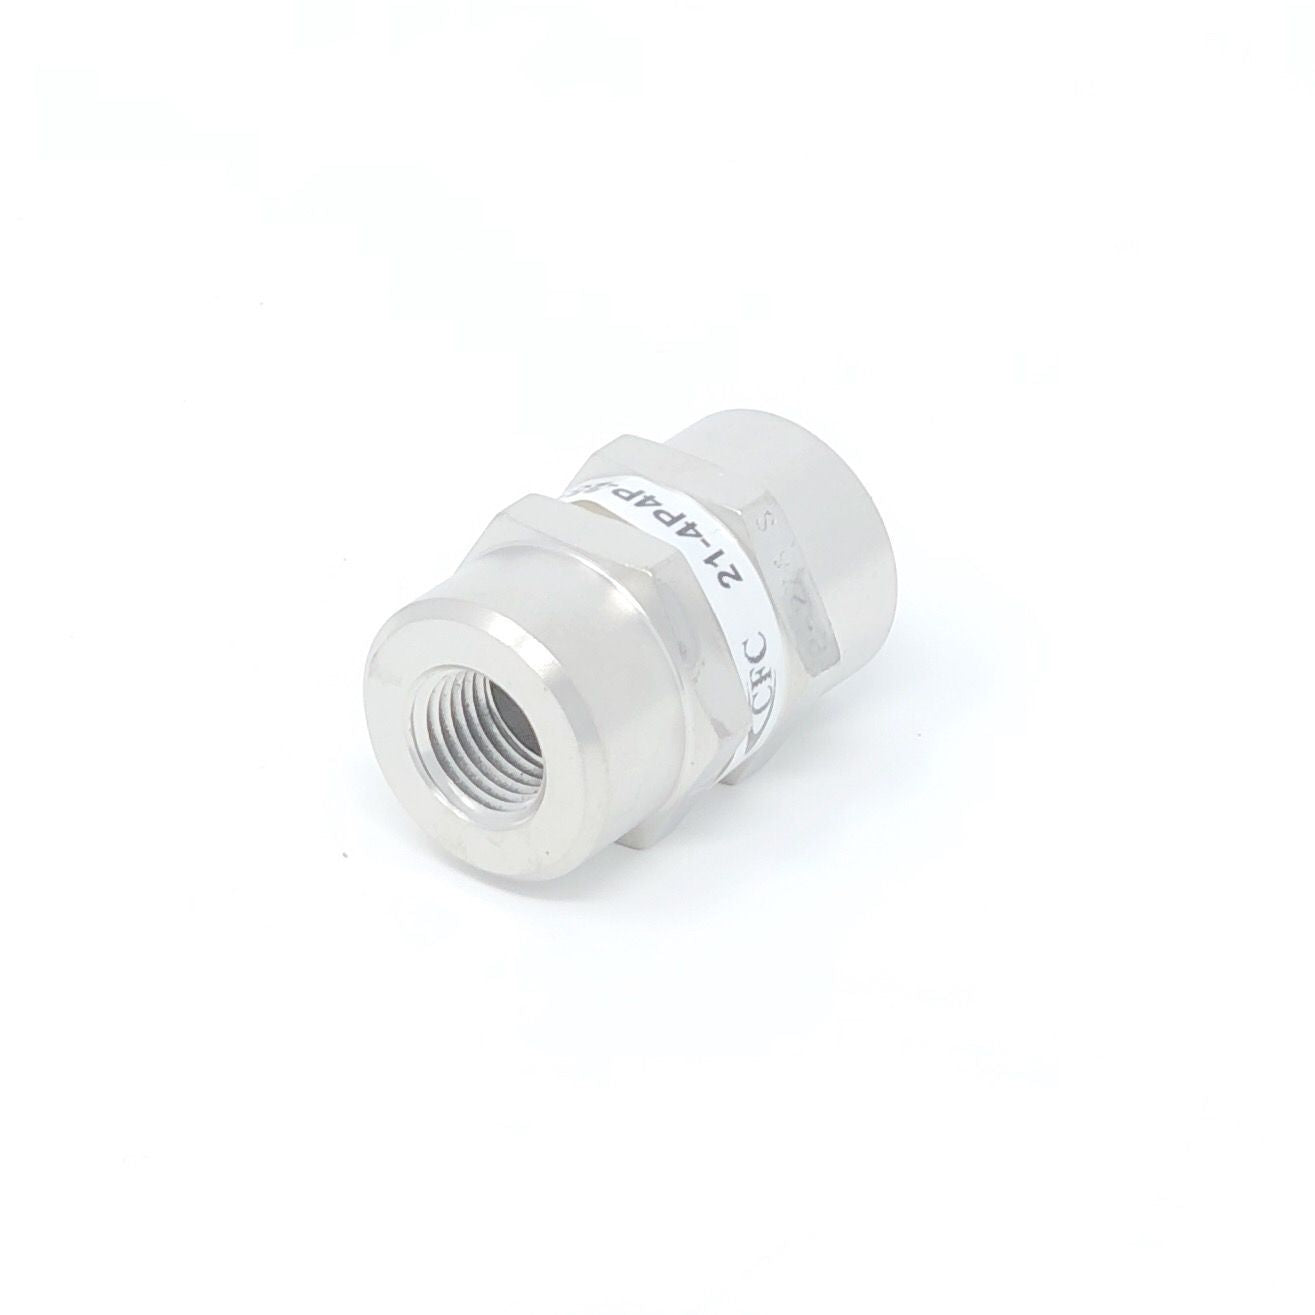 21-8M8M-100S : Chase High Pressure Inline Filter, 3000psi, #8 SAE (1/2"), 100 Micron, No Visual Indicator, With Bypass